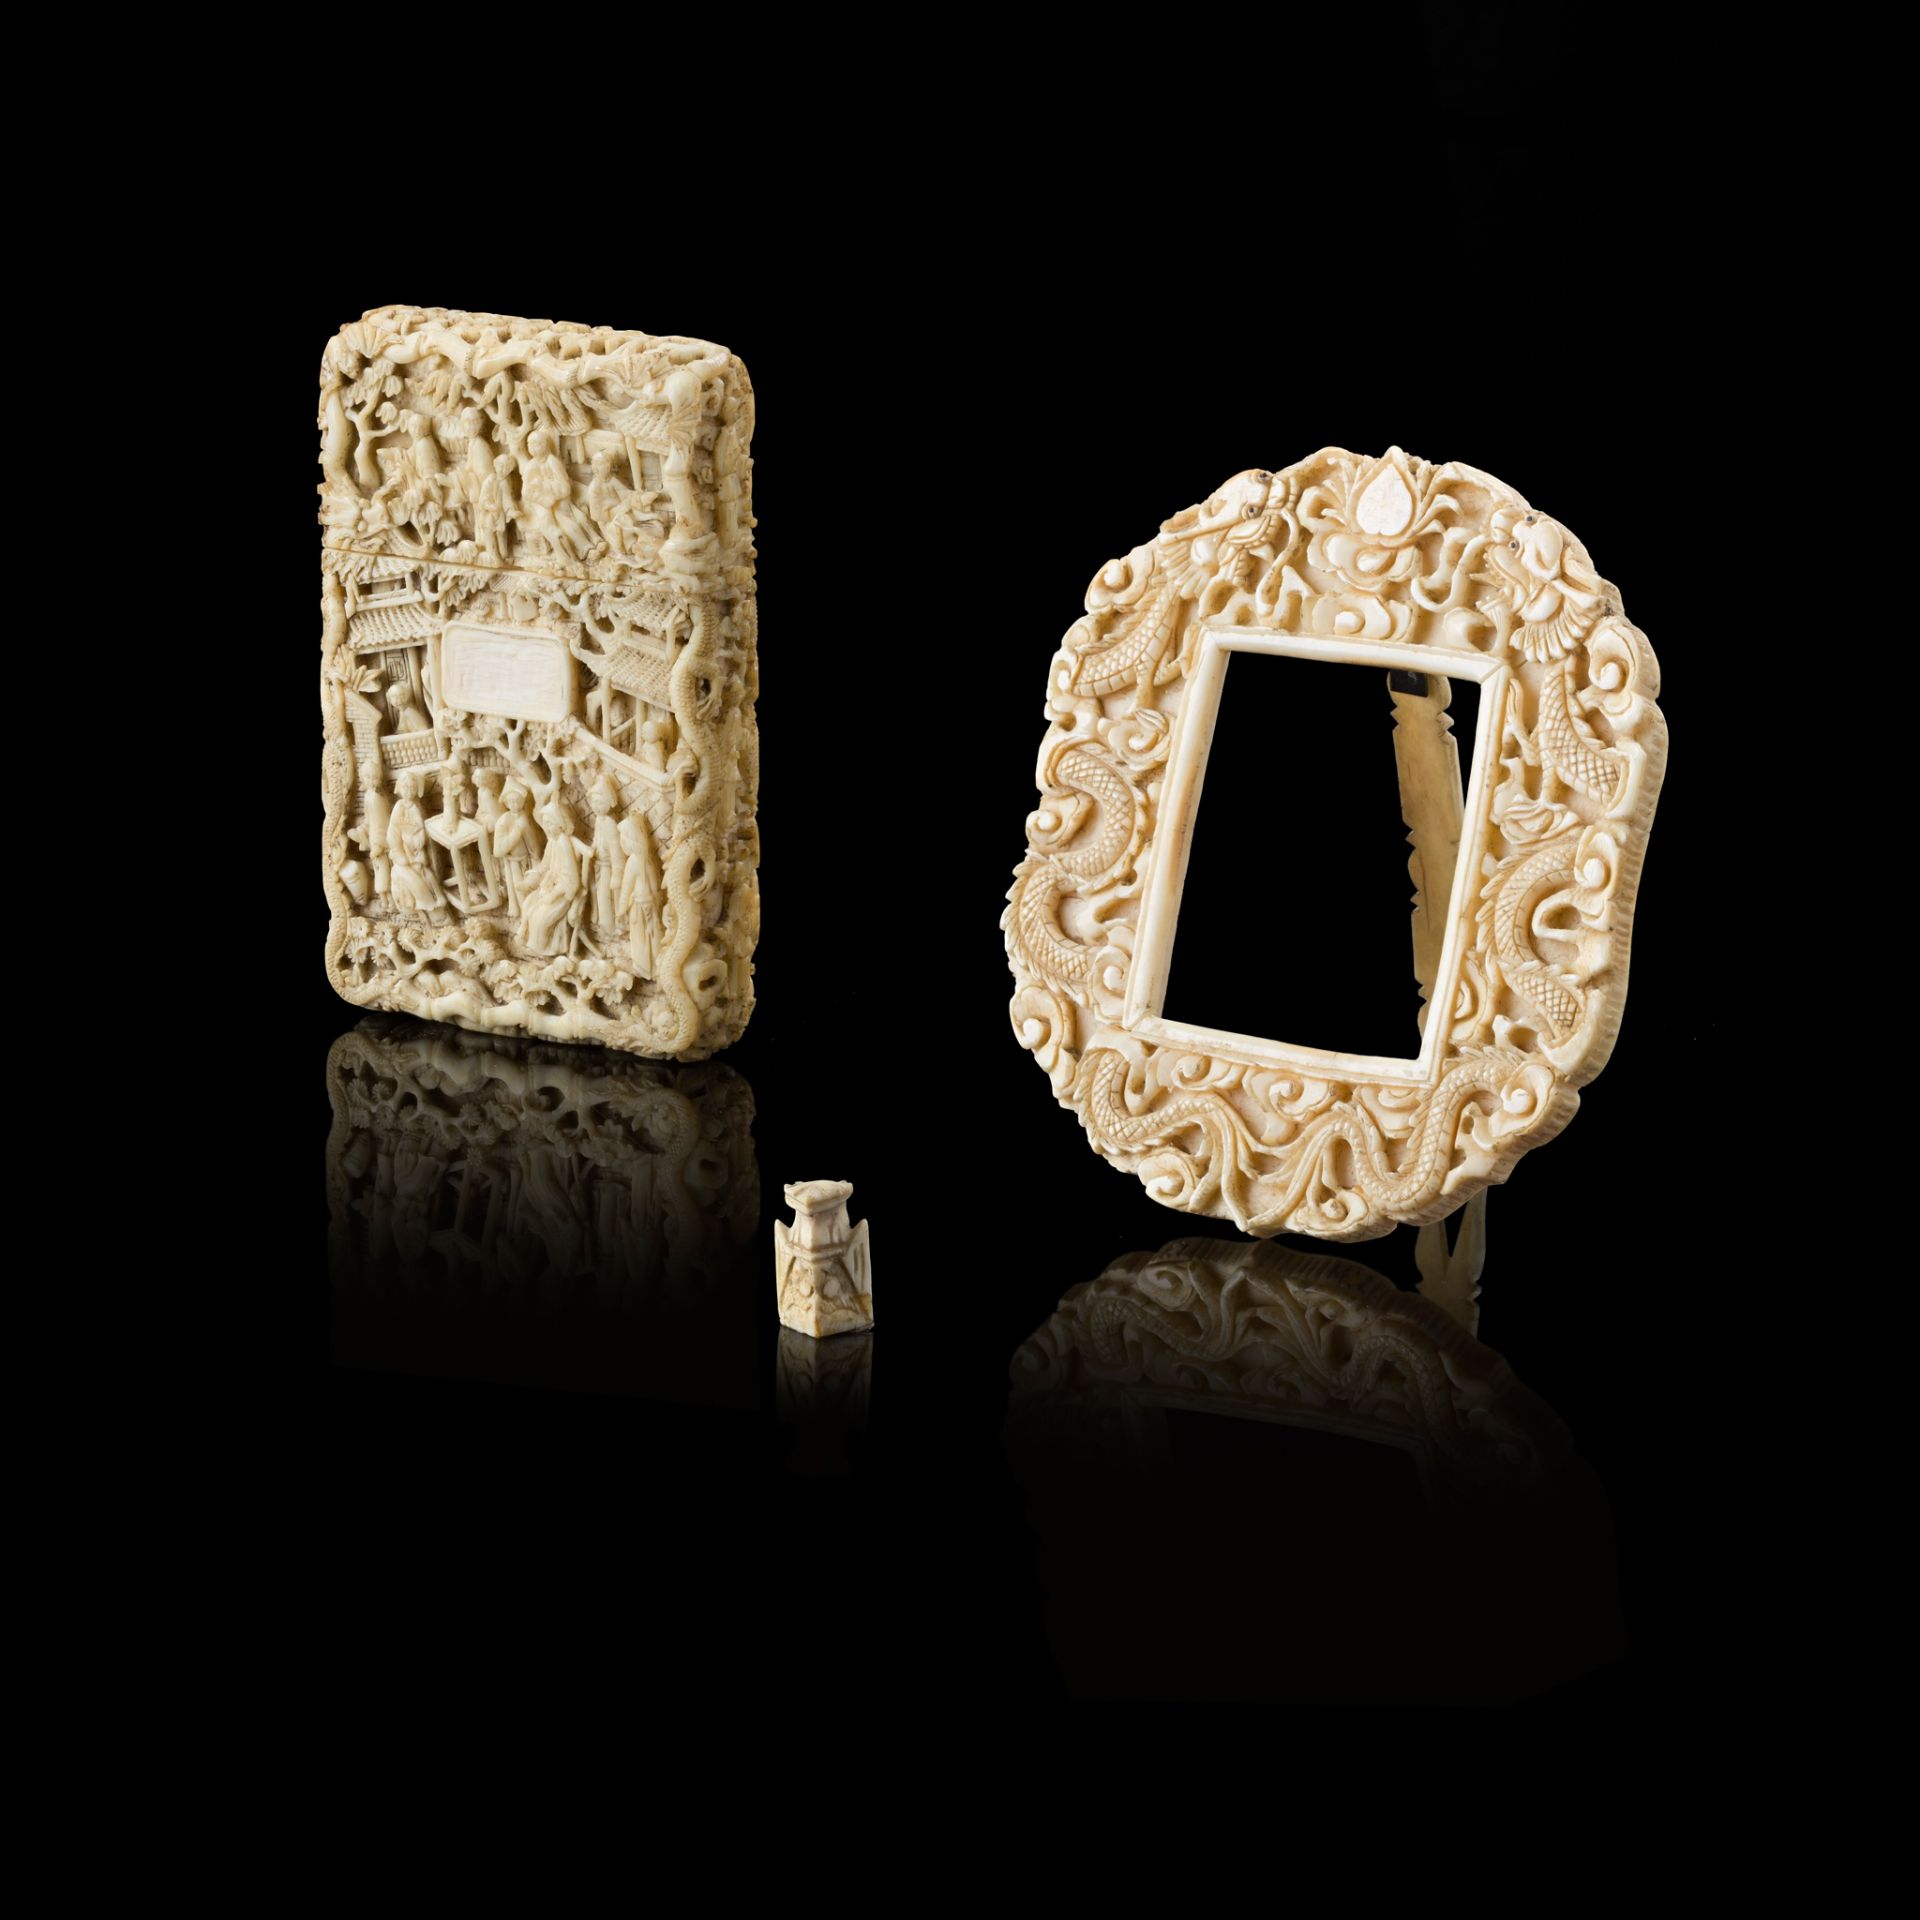 Y GROUP OF THREE CARVED IVORY ARTICLES QING DYNASTY, 19TH CENTURY